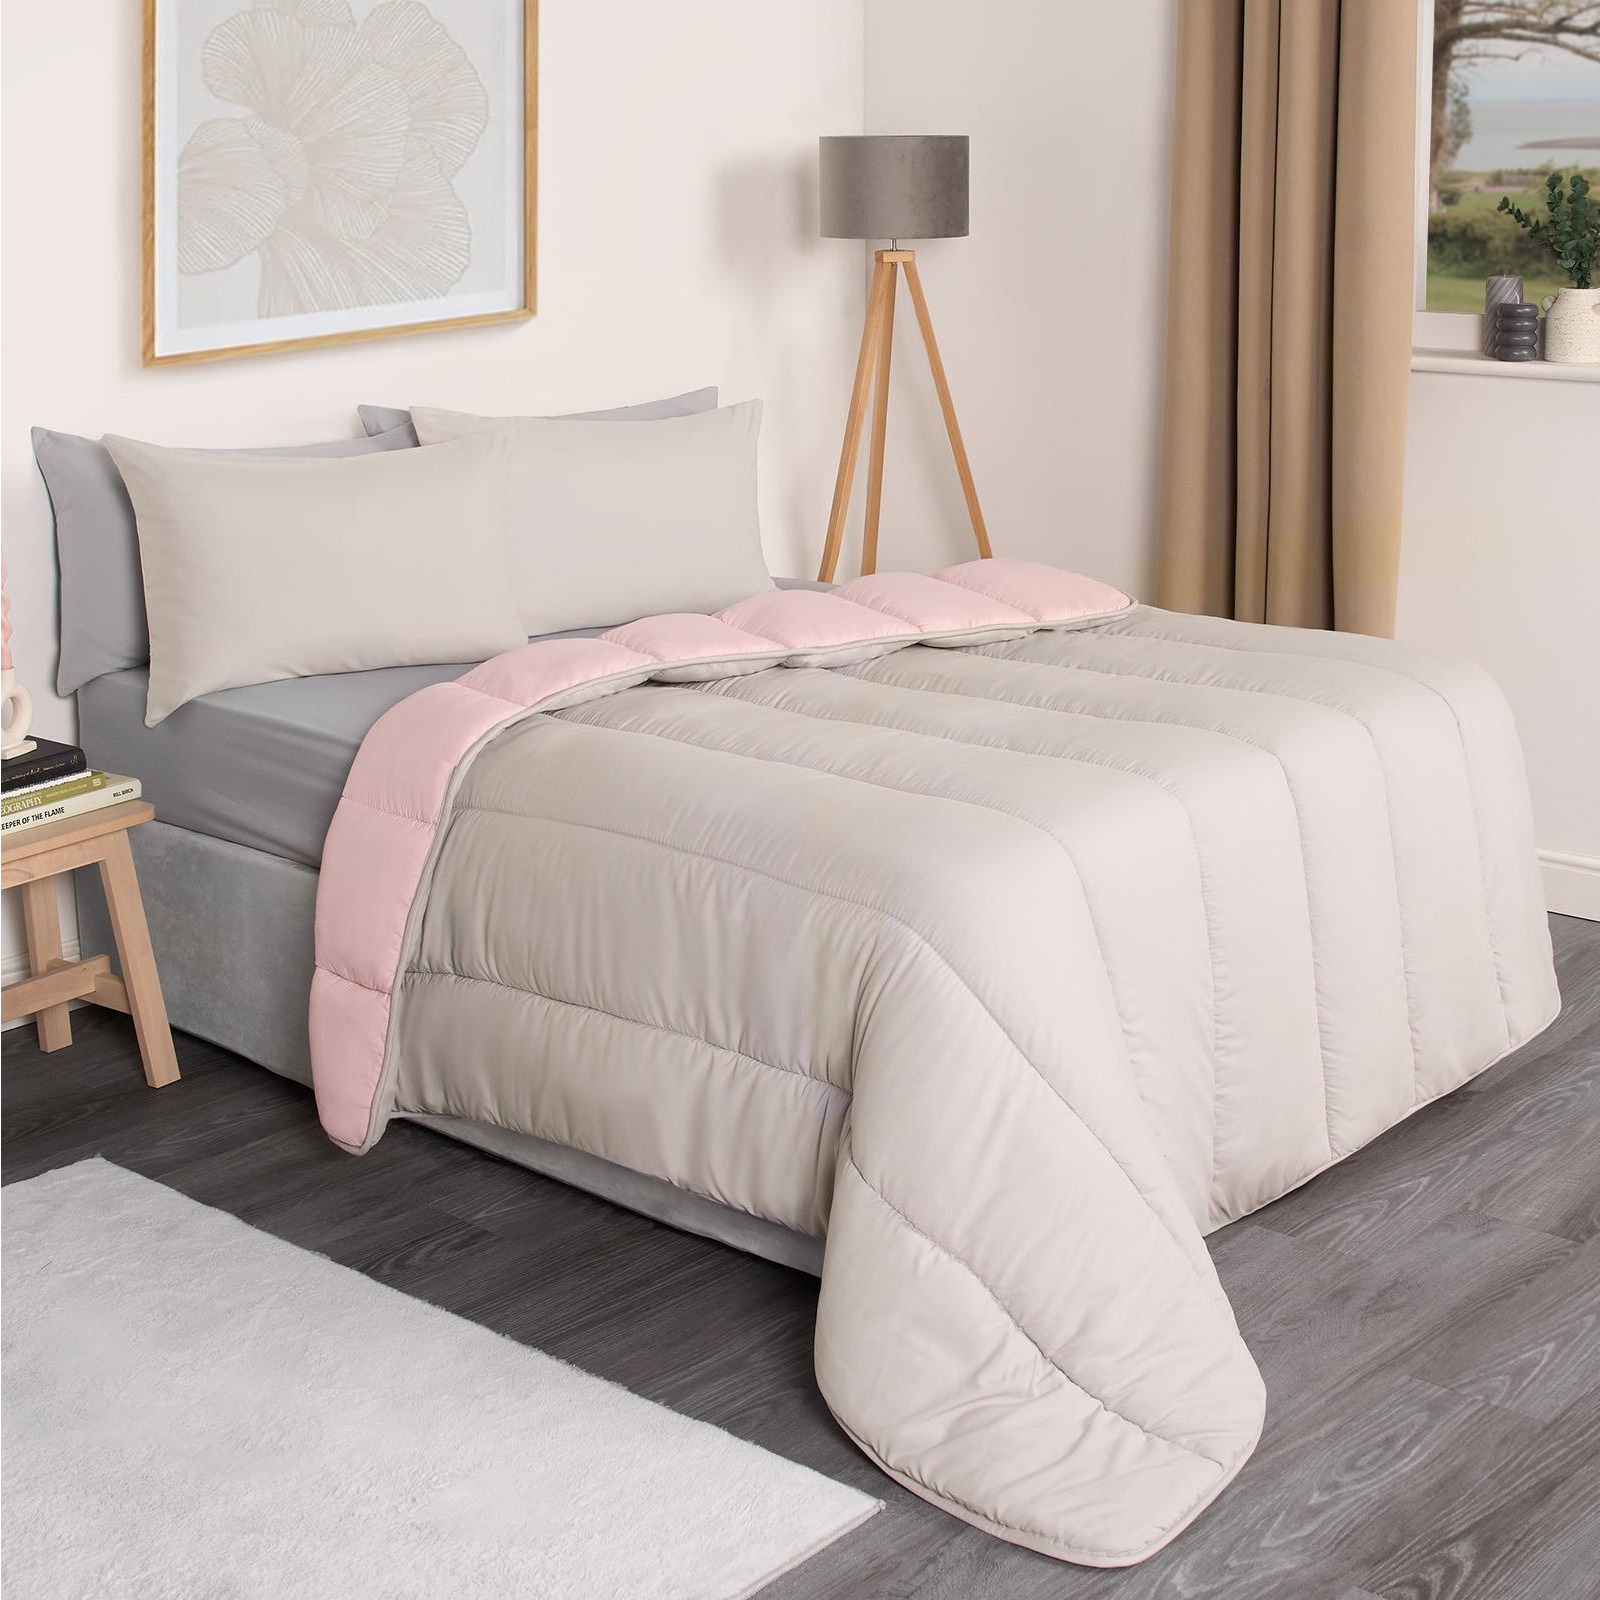 Soft Coverless 10.5 TOG Duvet Set Pillowcase Quilted Cover - image 1